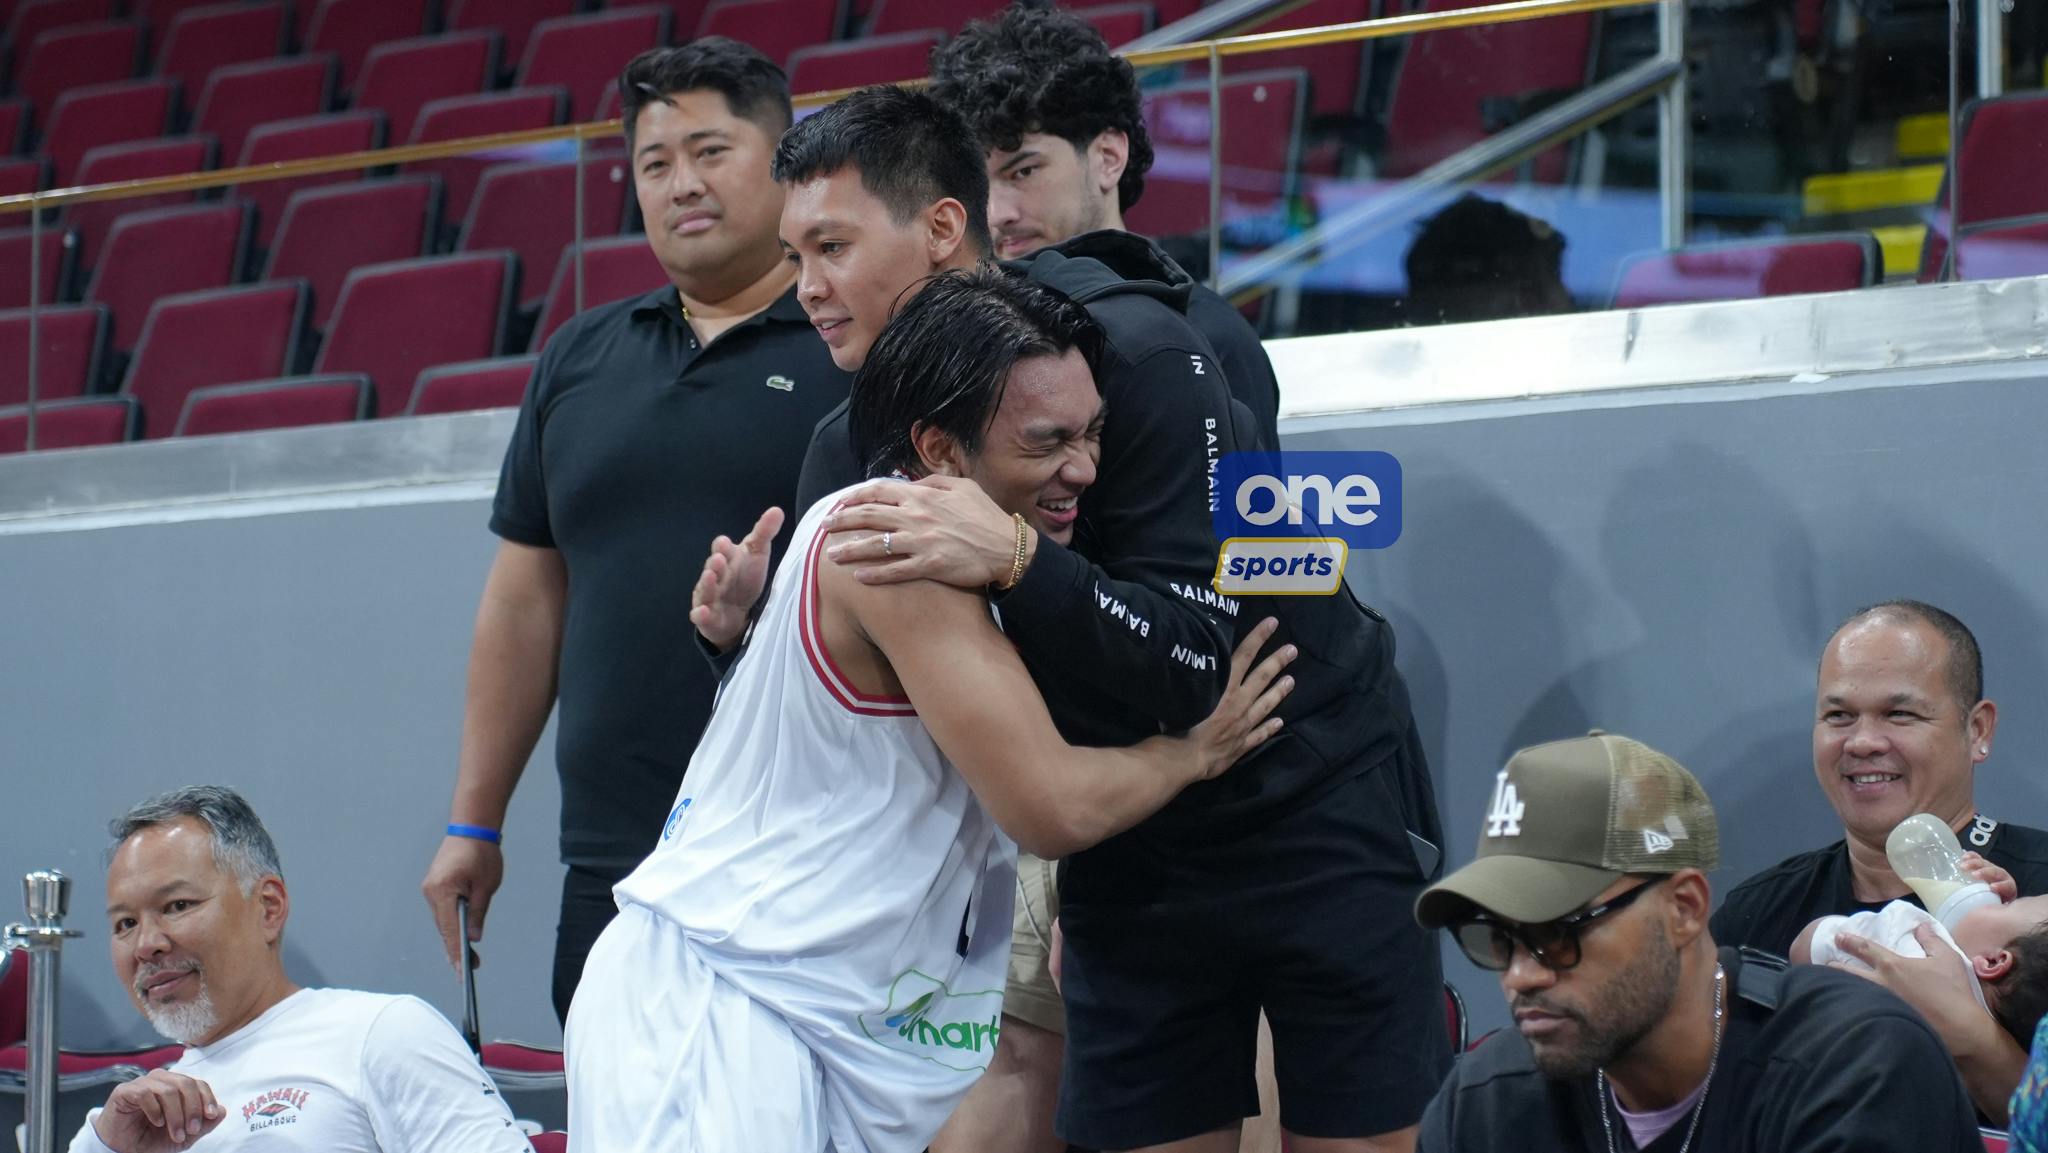 Scottie Thompson is a proud kuya as brother Justin hits winner to claim NBTC Division 2 championship